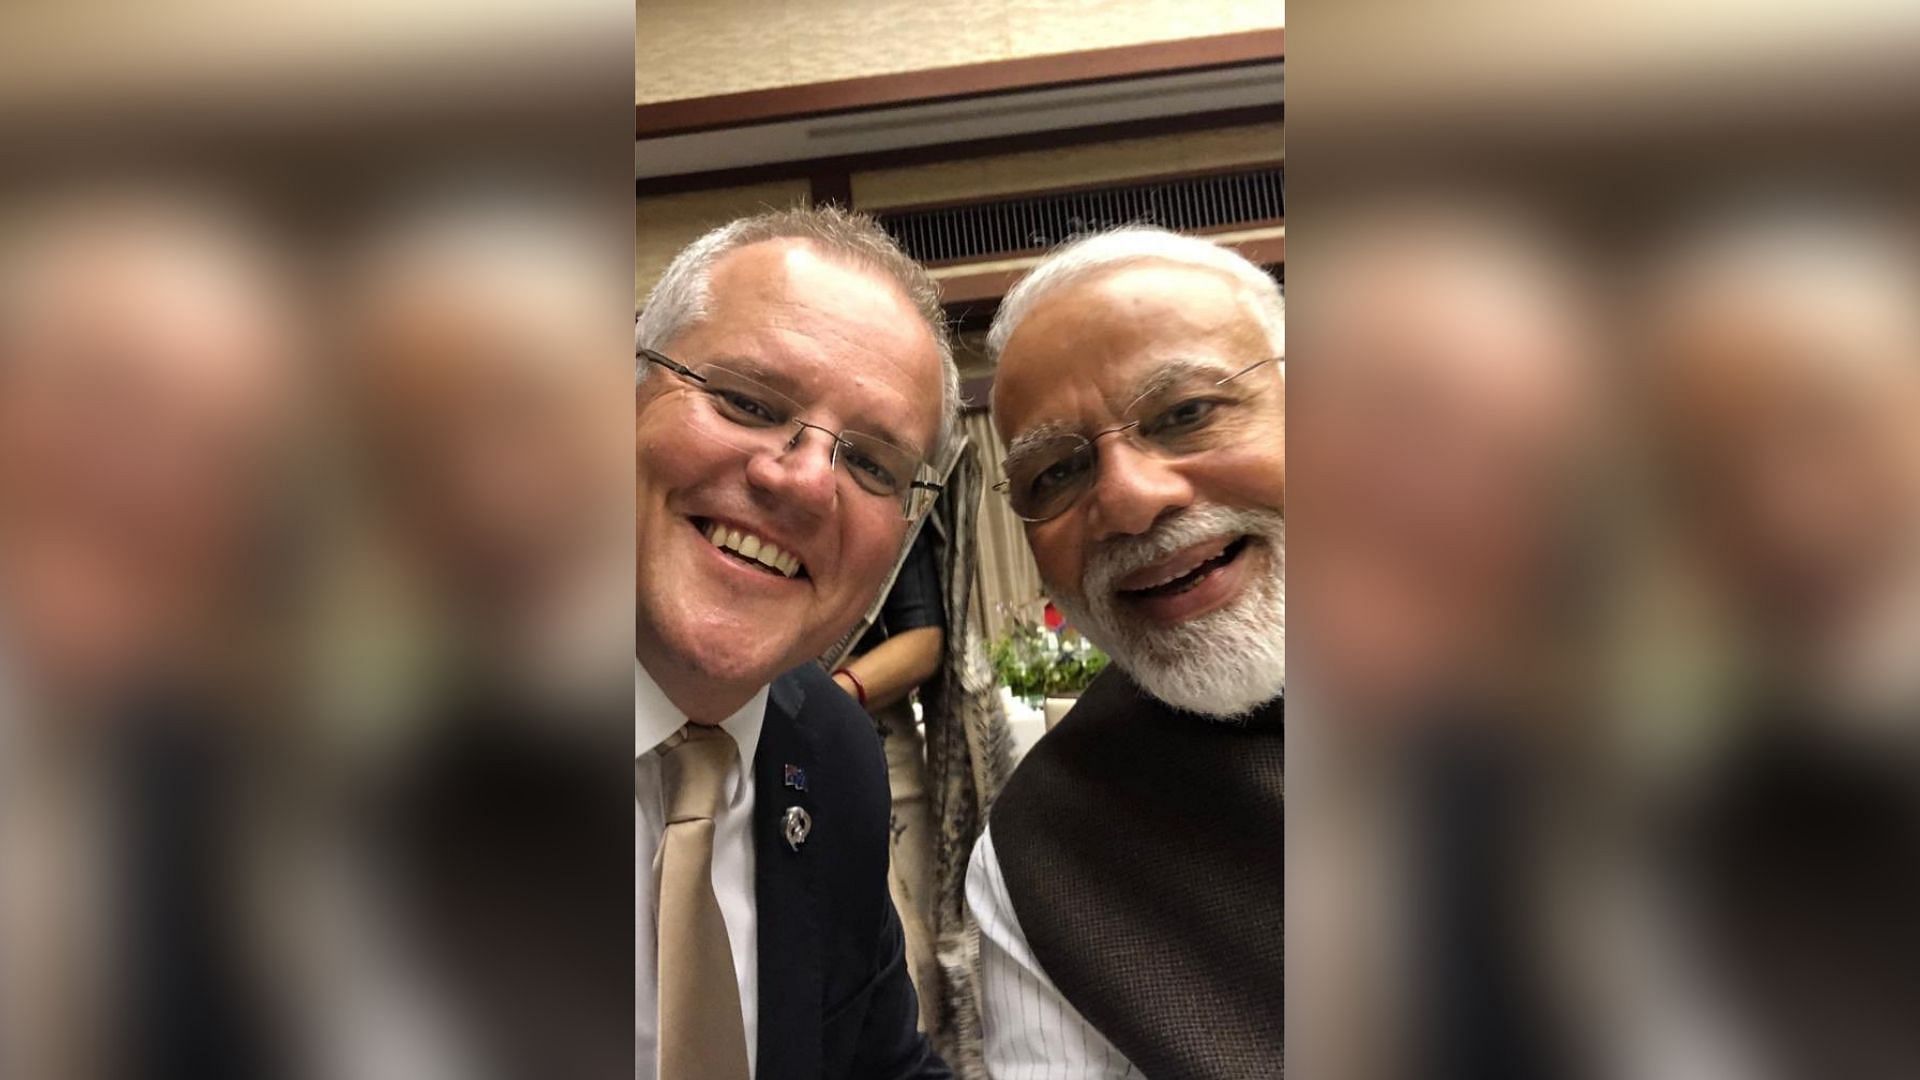 PM Scott Morrison tweeted a picture of the two leaders from the G20 summit.